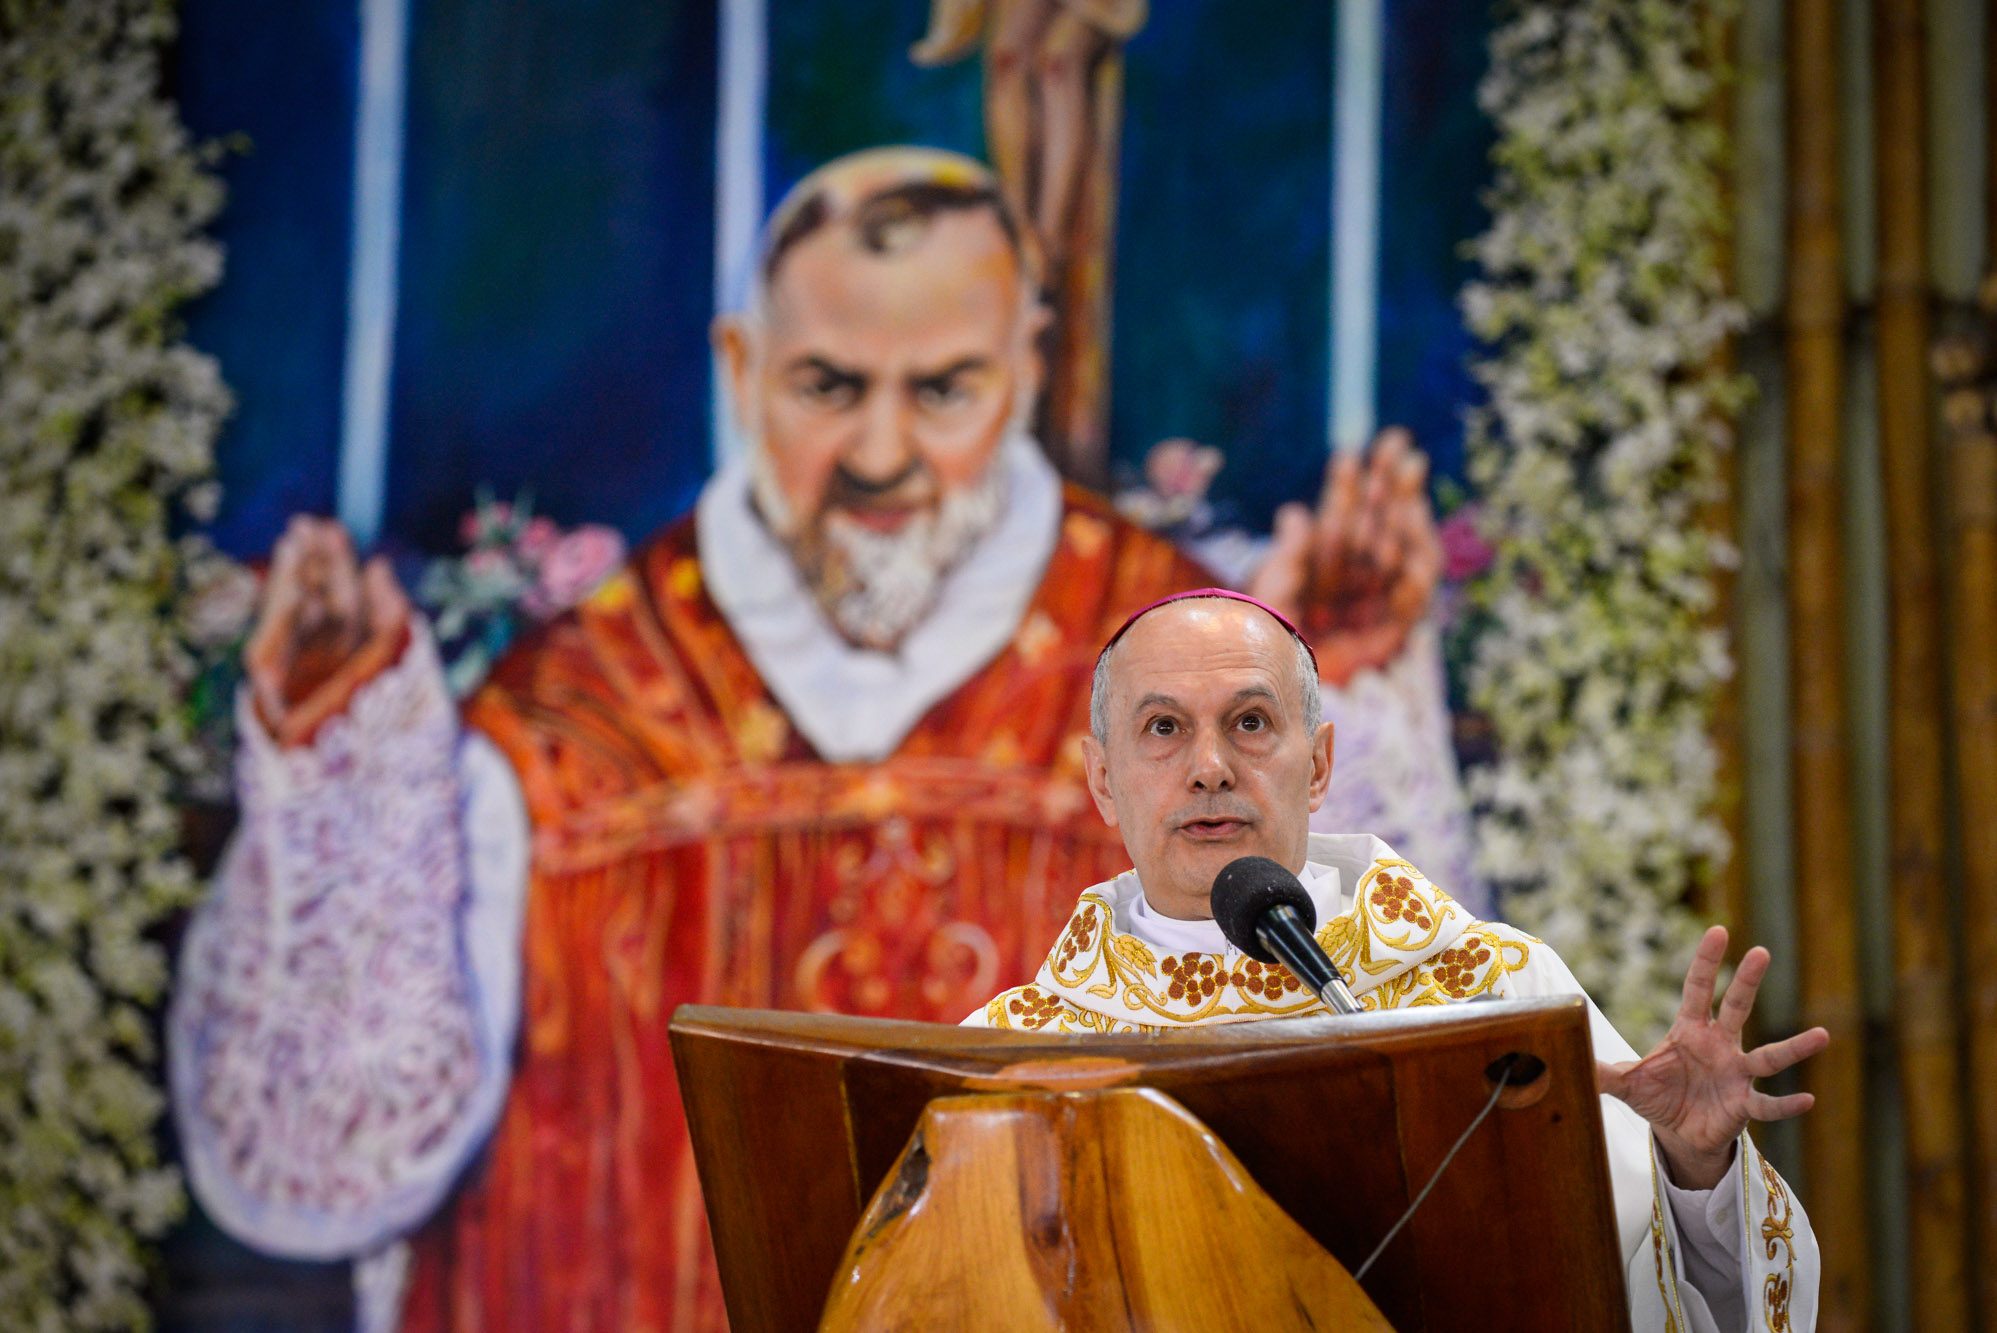 ‘You are not alone in your suffering,’ papal nuncio assures Padre Pio devotees